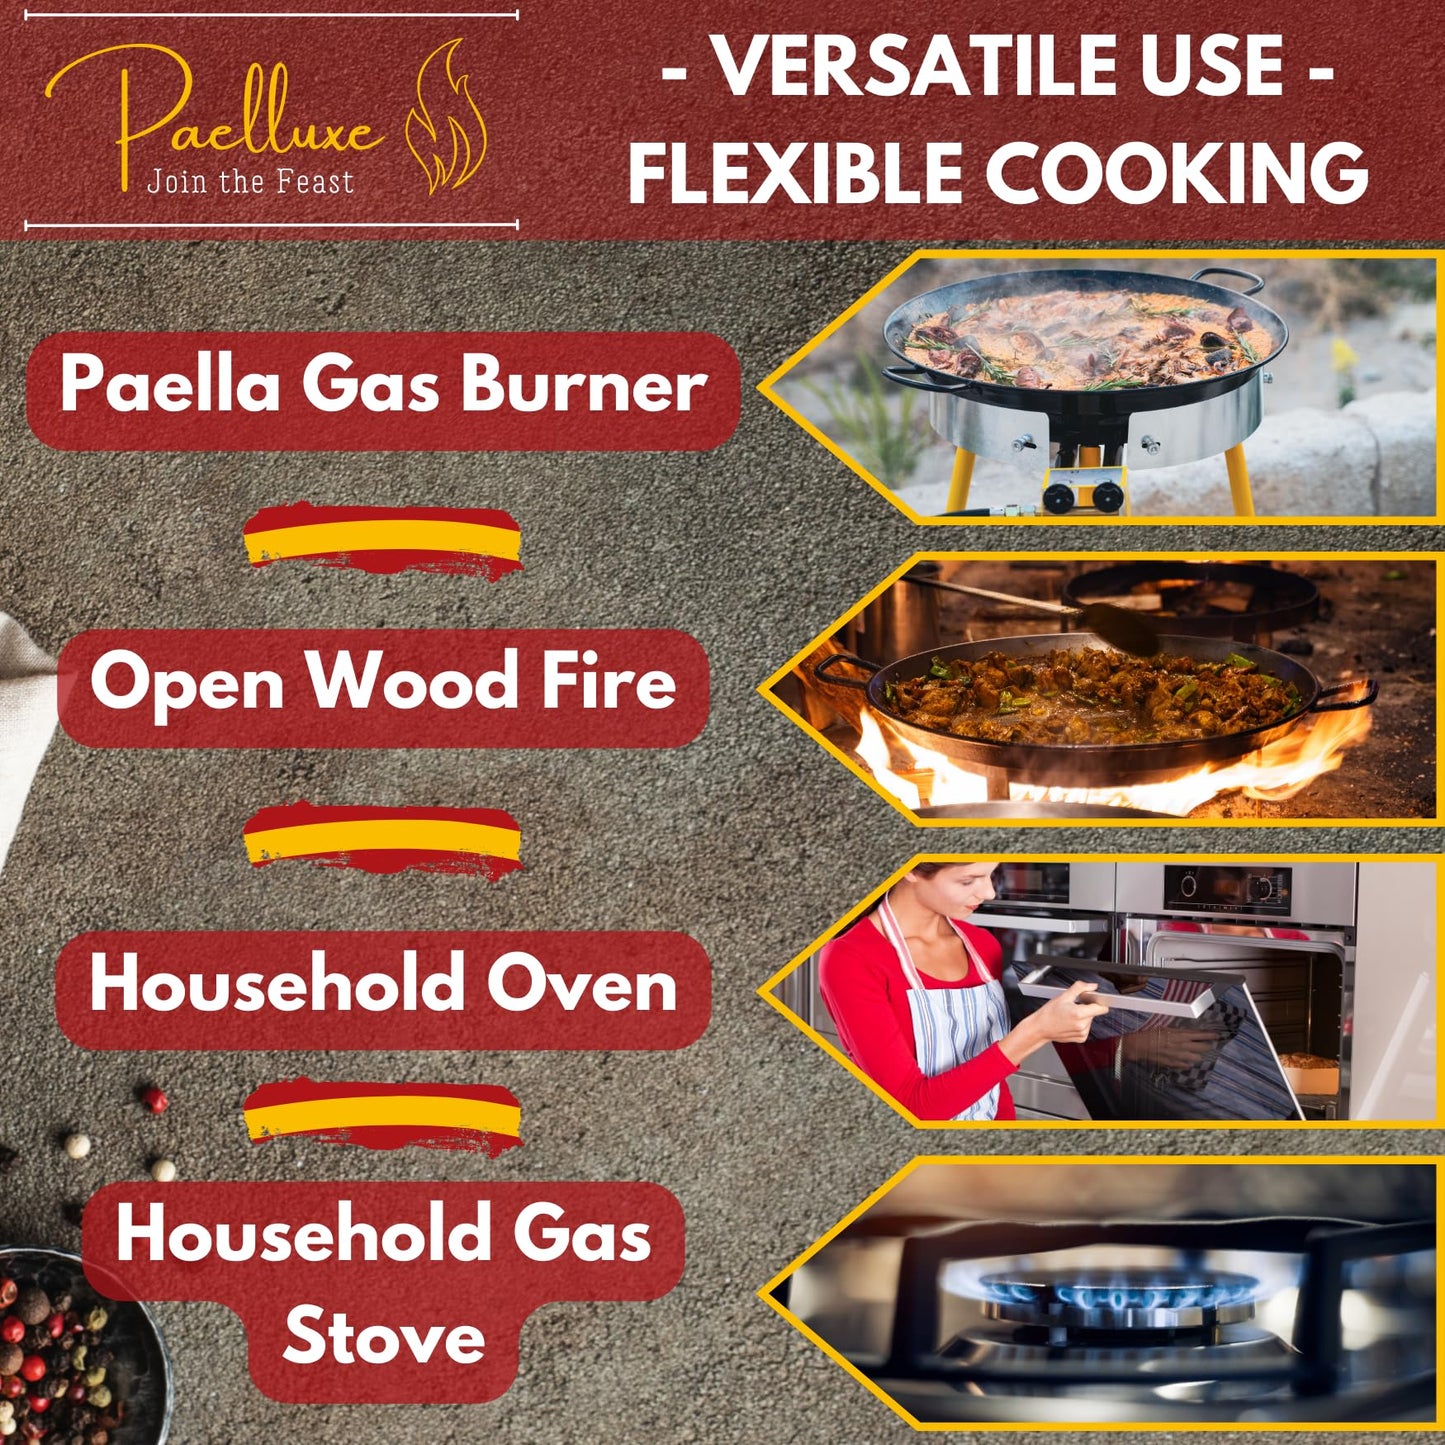 Paelluxe 18 Inch Paella Pan 12 Servings - Enamelled No Rust Easy to Clean Steel Pan for Propane Gas Burners for Cooking, Large Paella Pan - Indoor & Outdoor Cooking Skillet - Cacerola Paellera Sarten